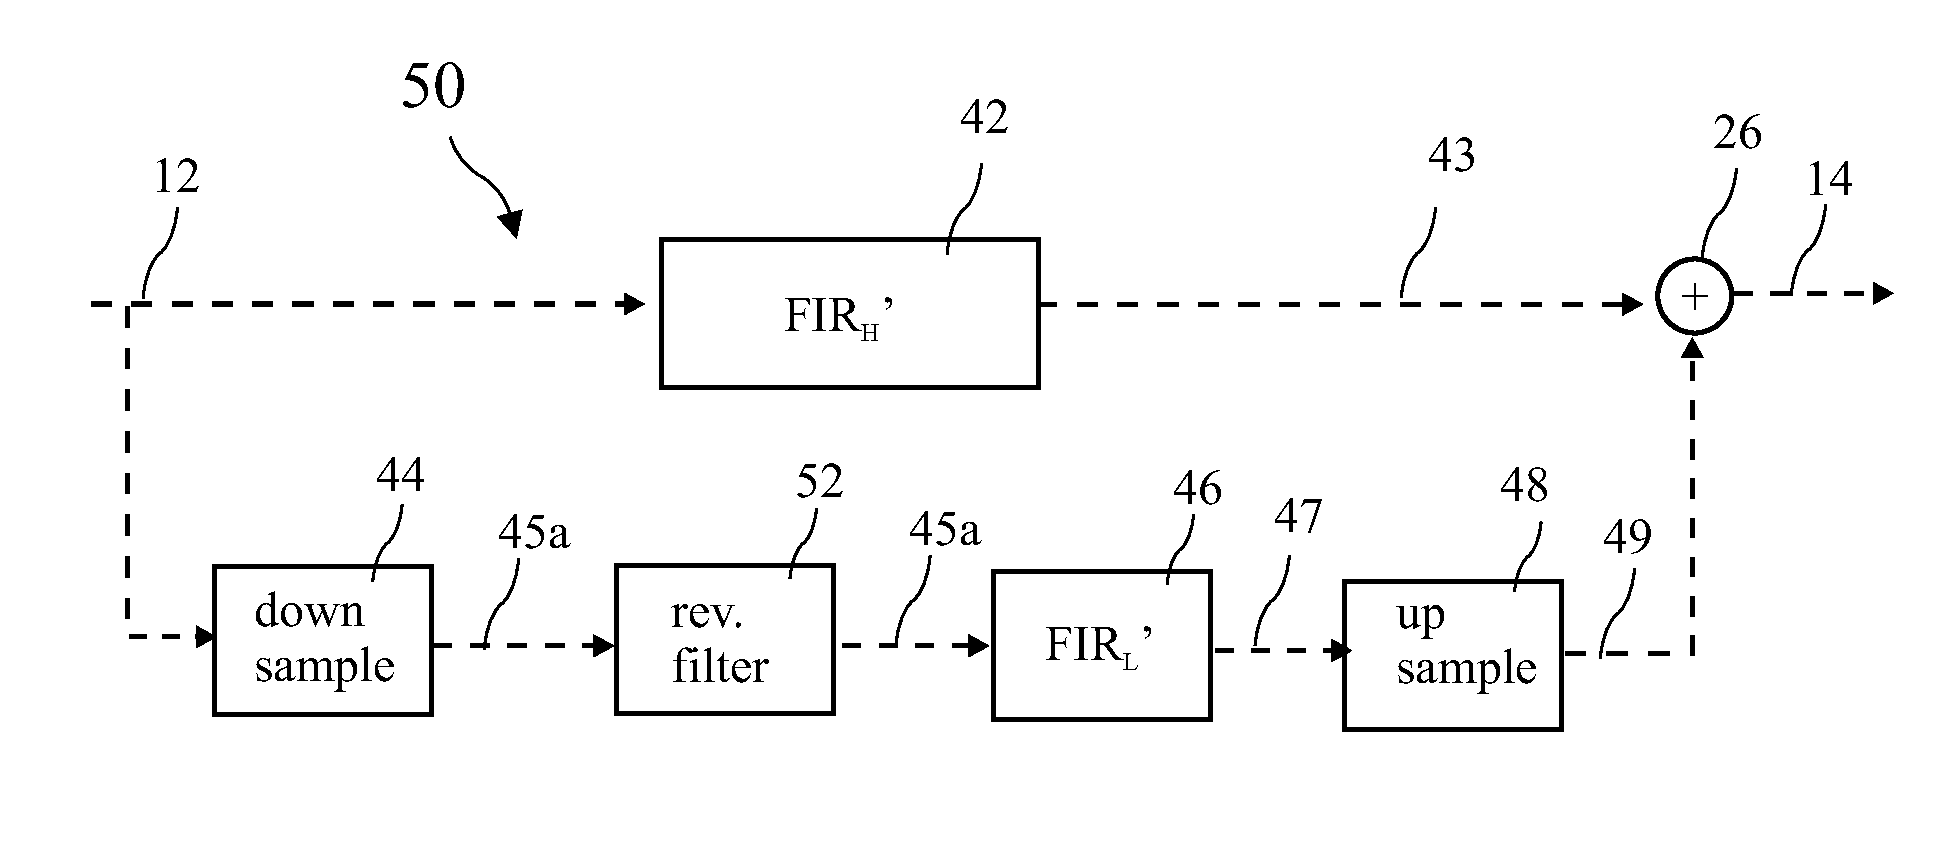 Multi-Rate Implementation Without High-Pass Filter